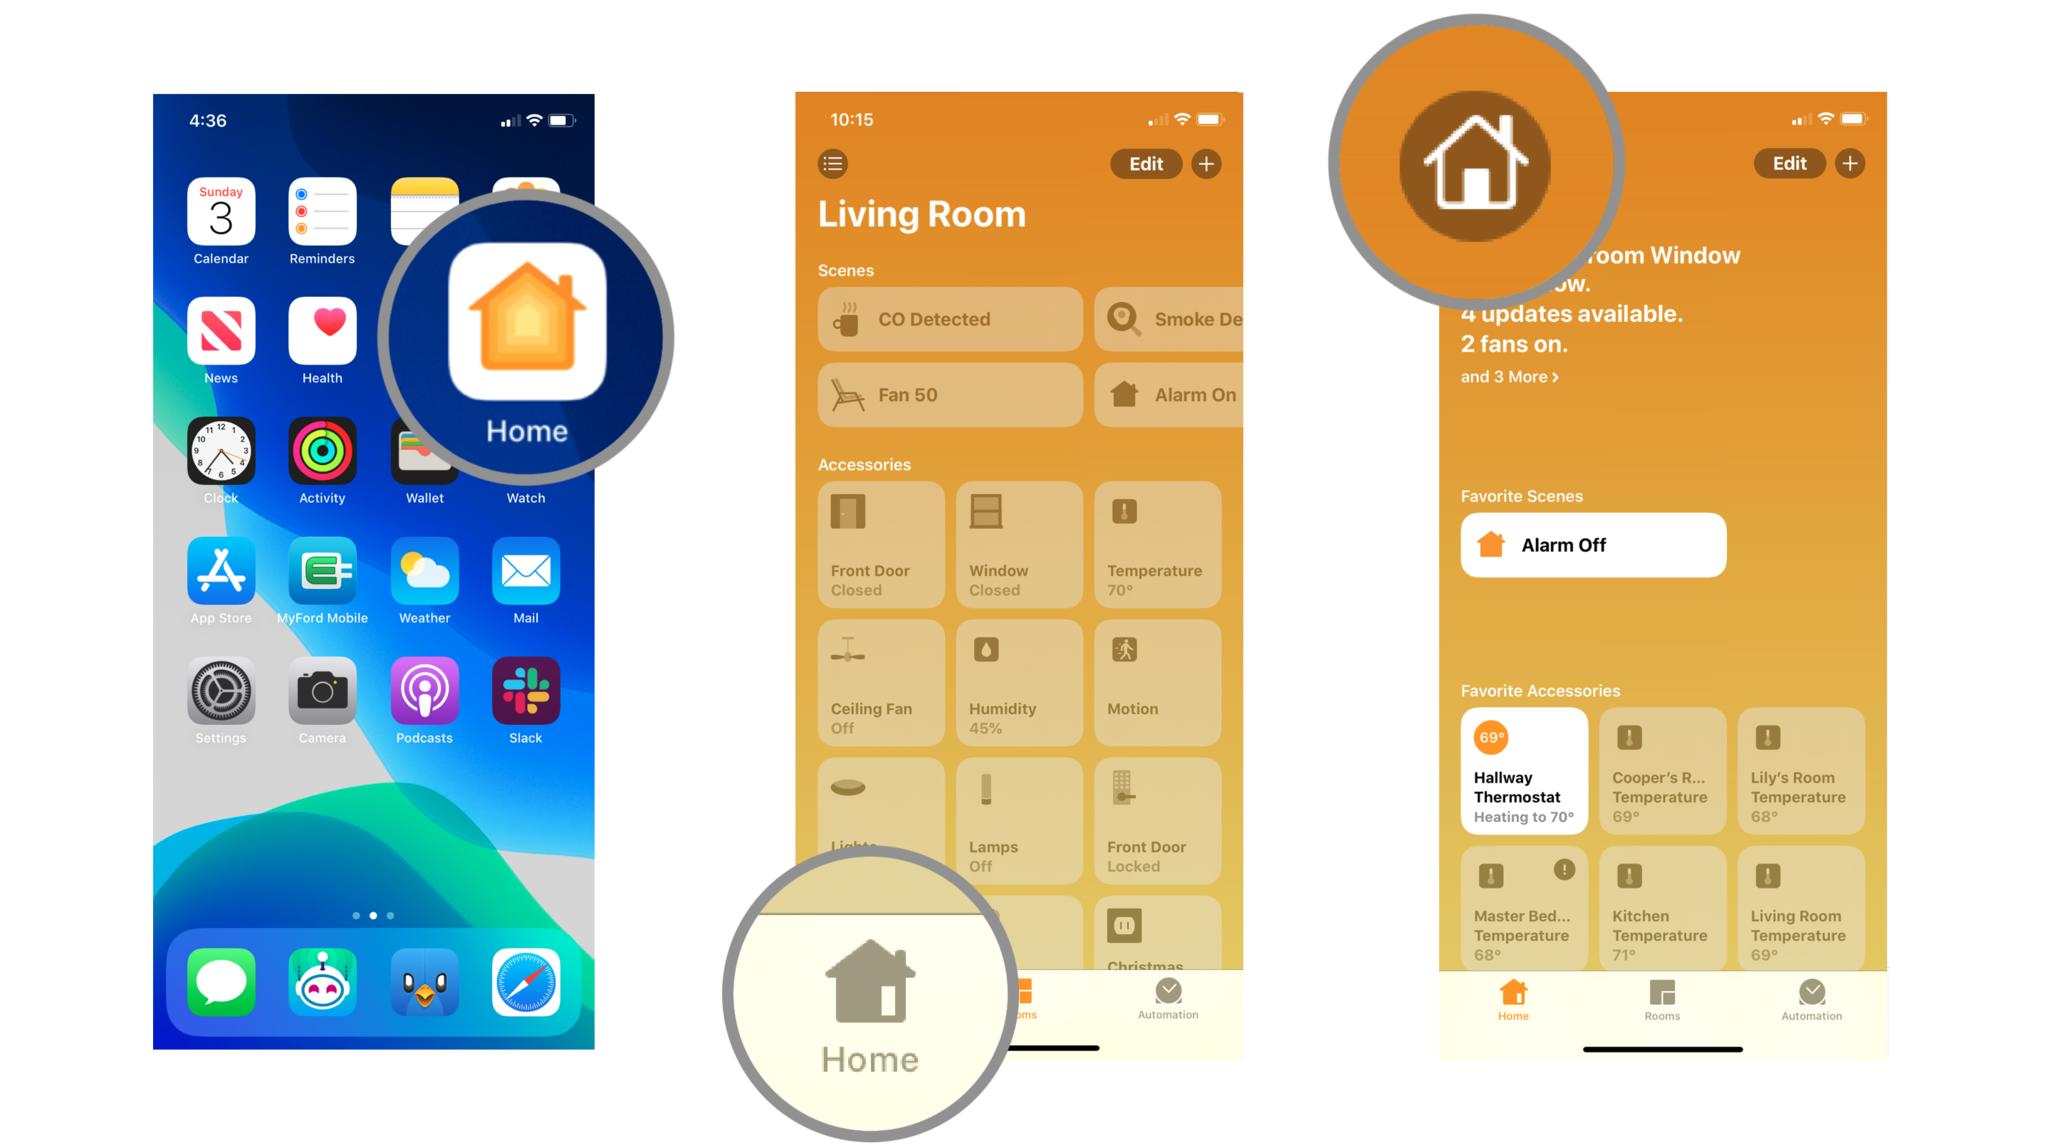 Steps 1-3 depicting how to change your home wallpaper in the Home app